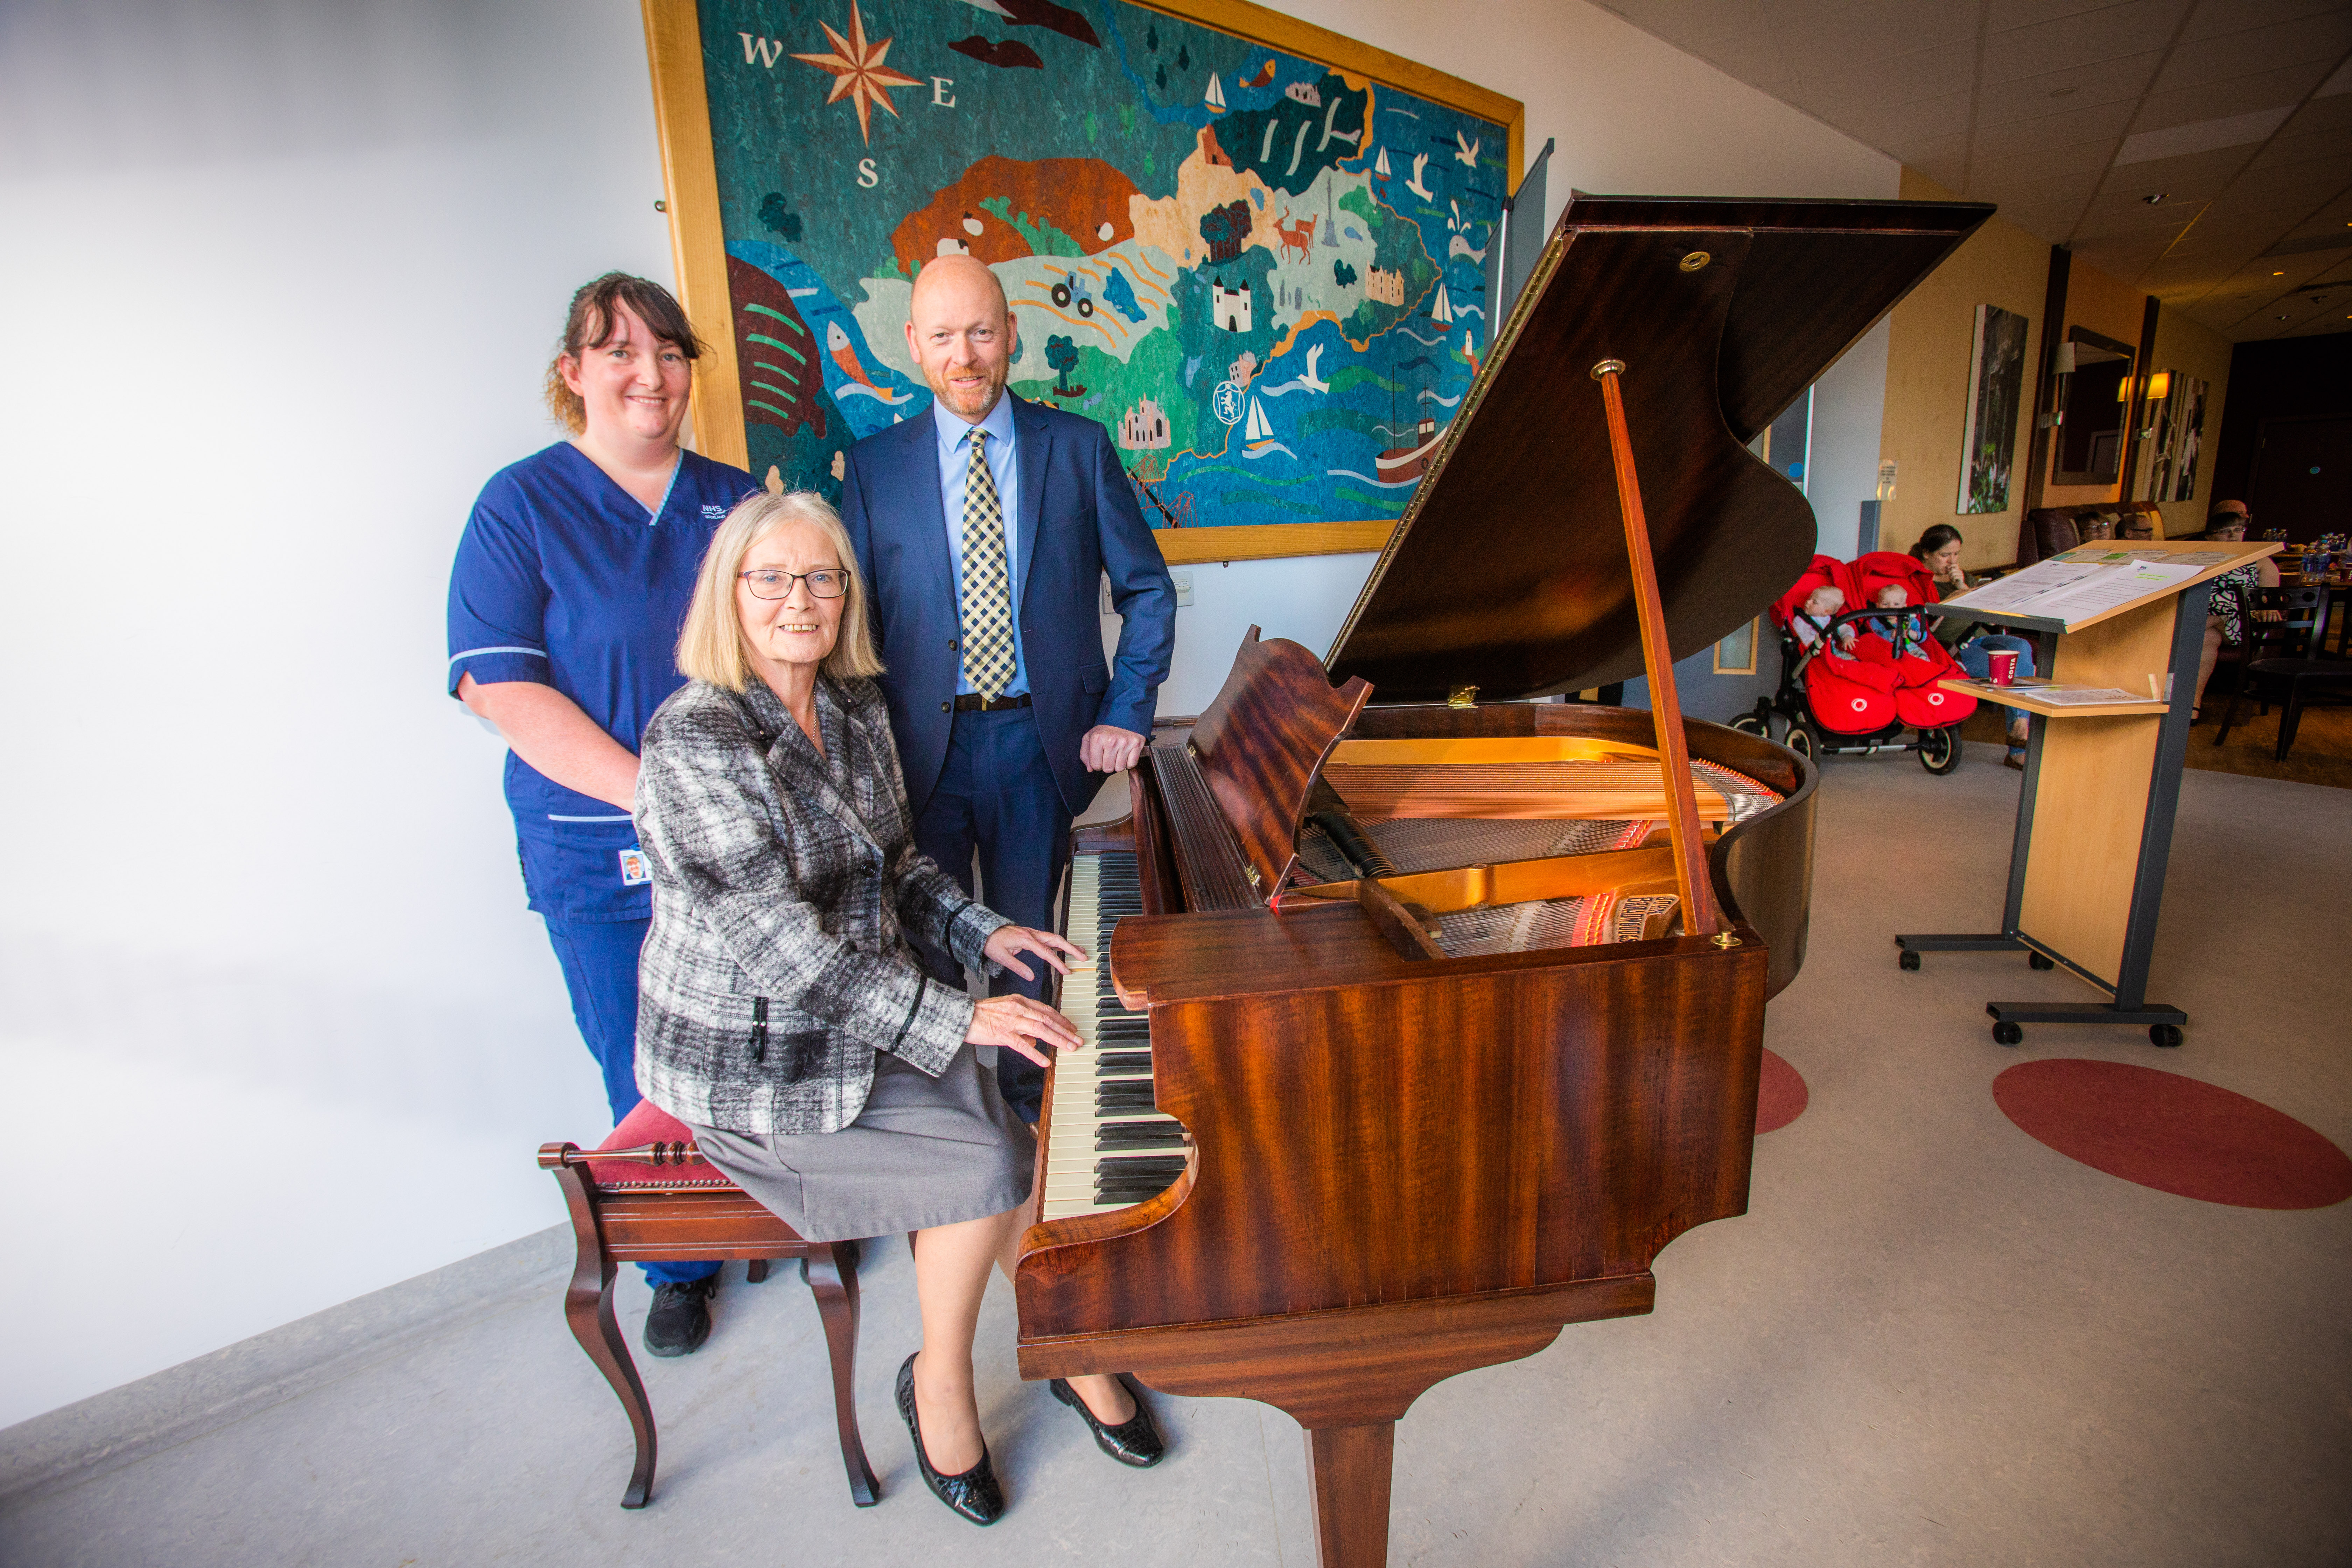 Tricia Marwick, the then chair of NHS Fife board, alongside Senior Charge Nurse Angela Glancey and Nicholas Russell when the piano was installed in 2019. Image: DC Thomson